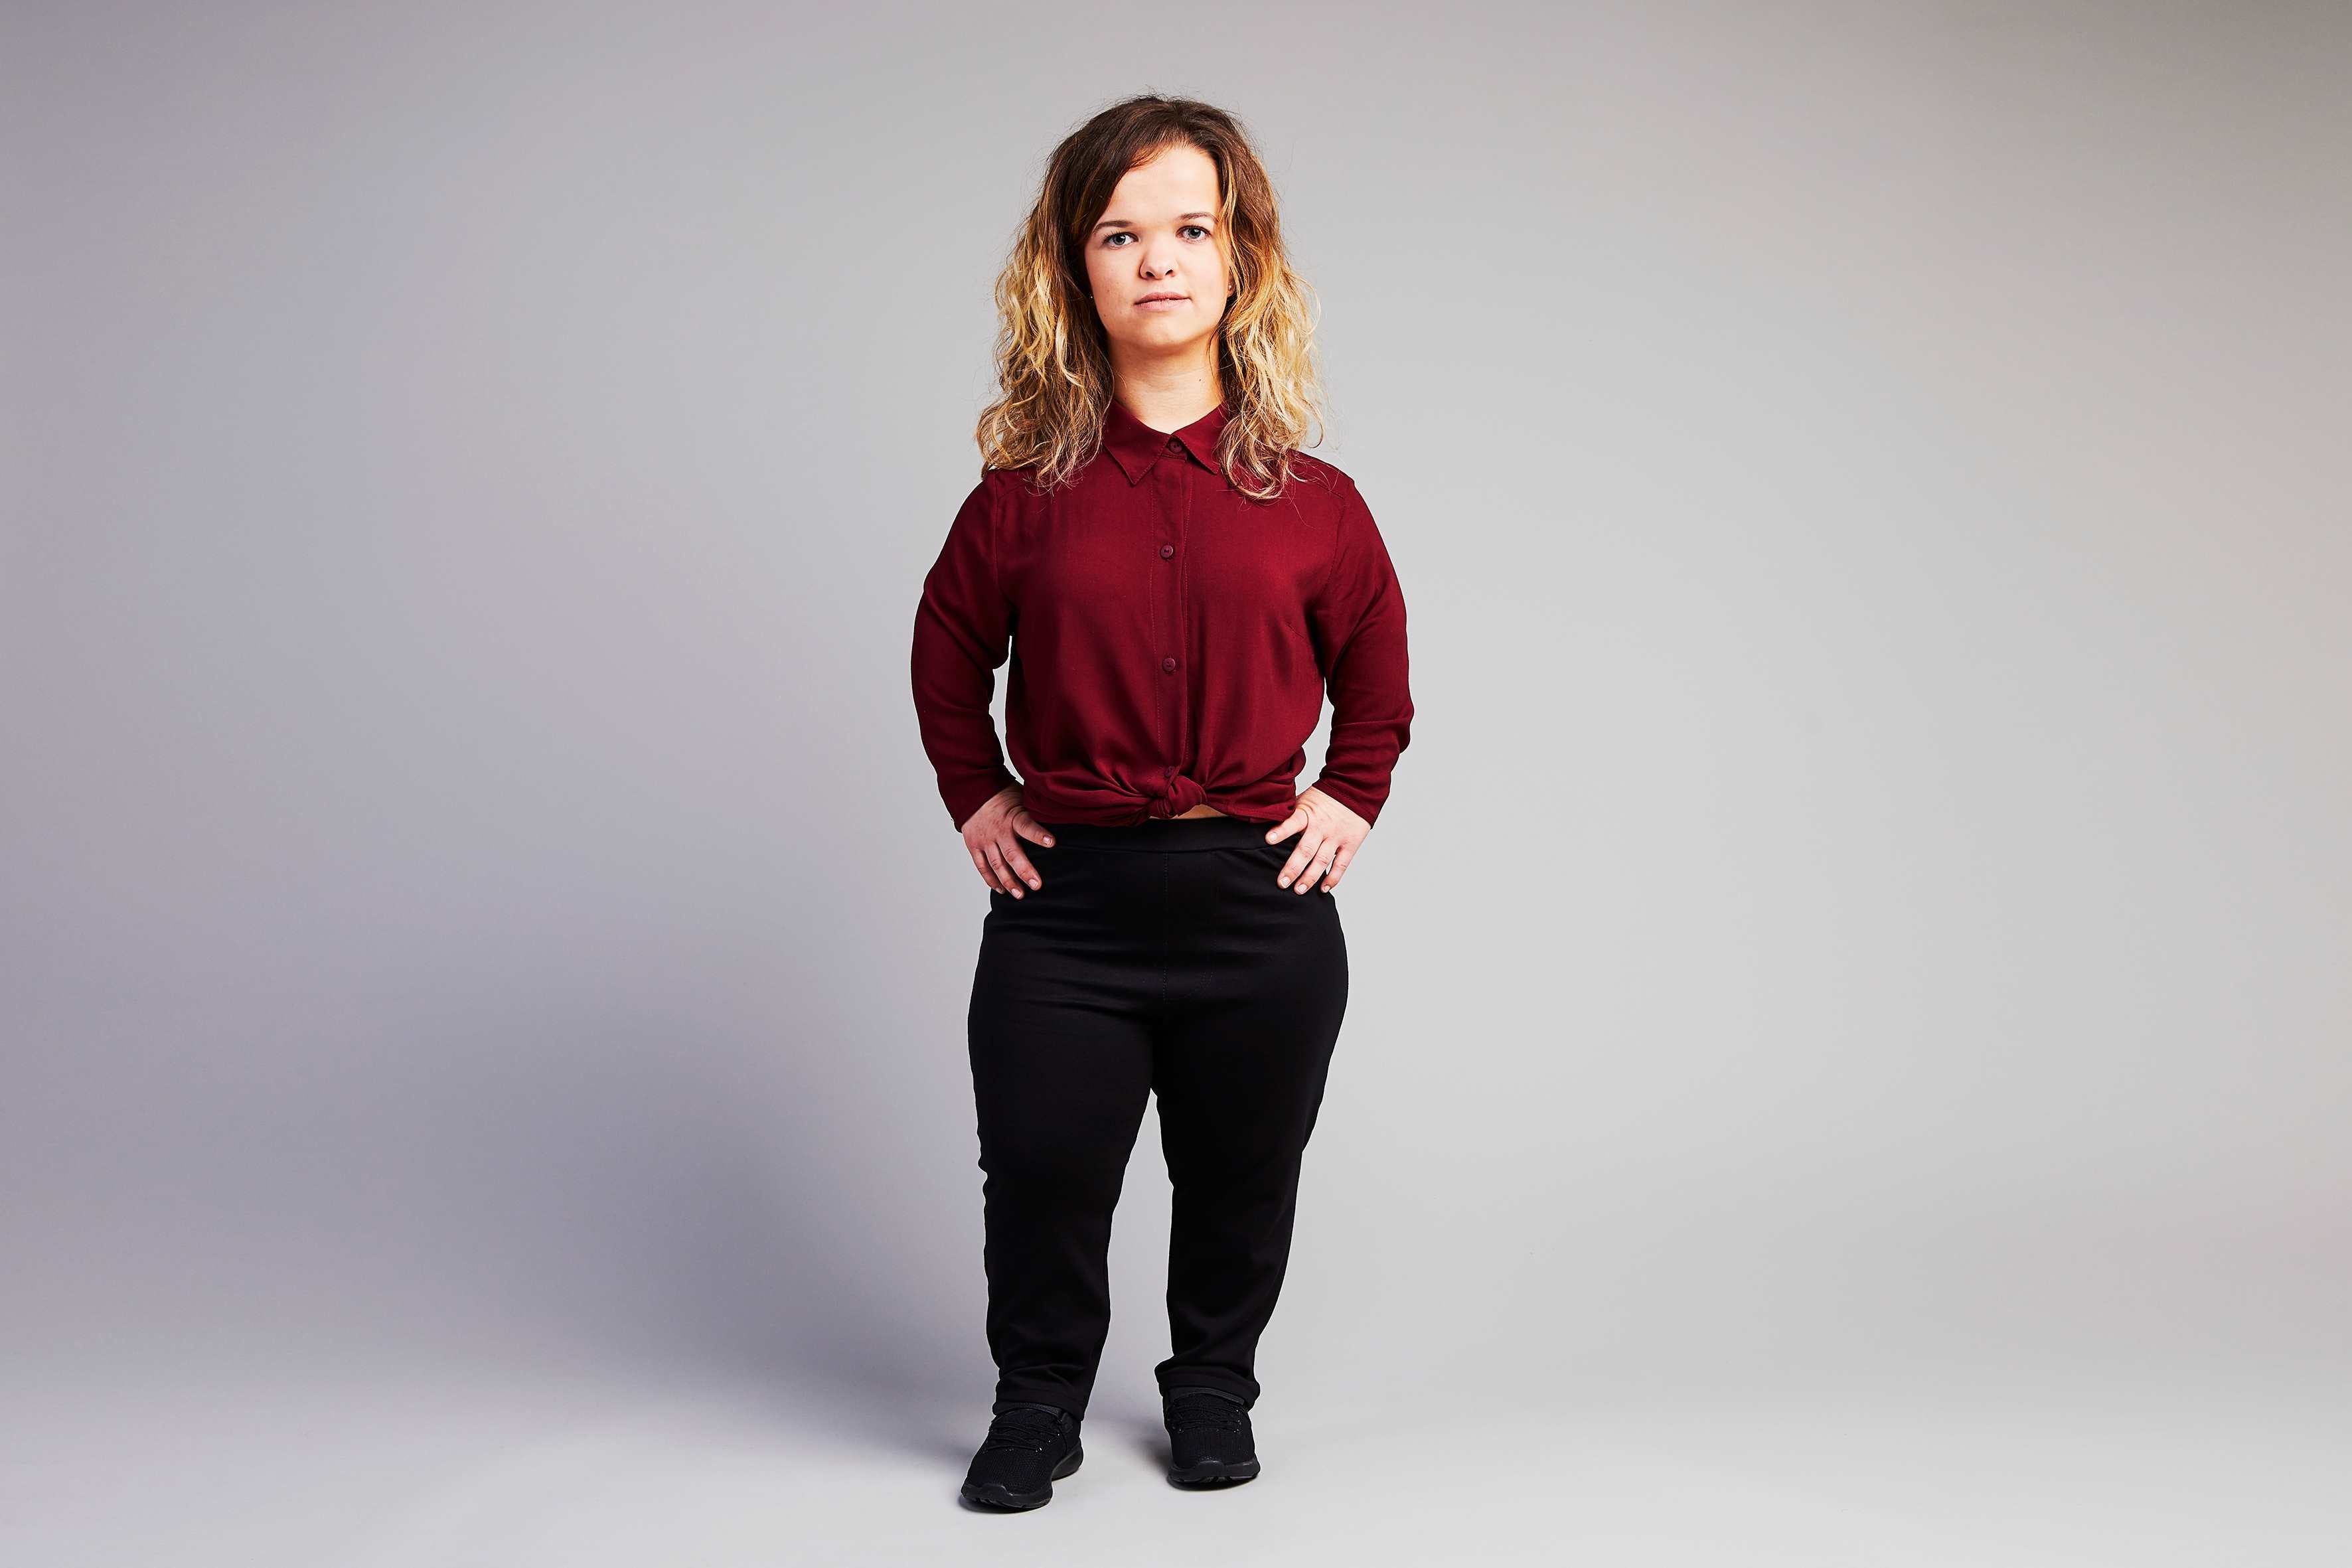 woman with dwarfism wearing red blouse and black pants